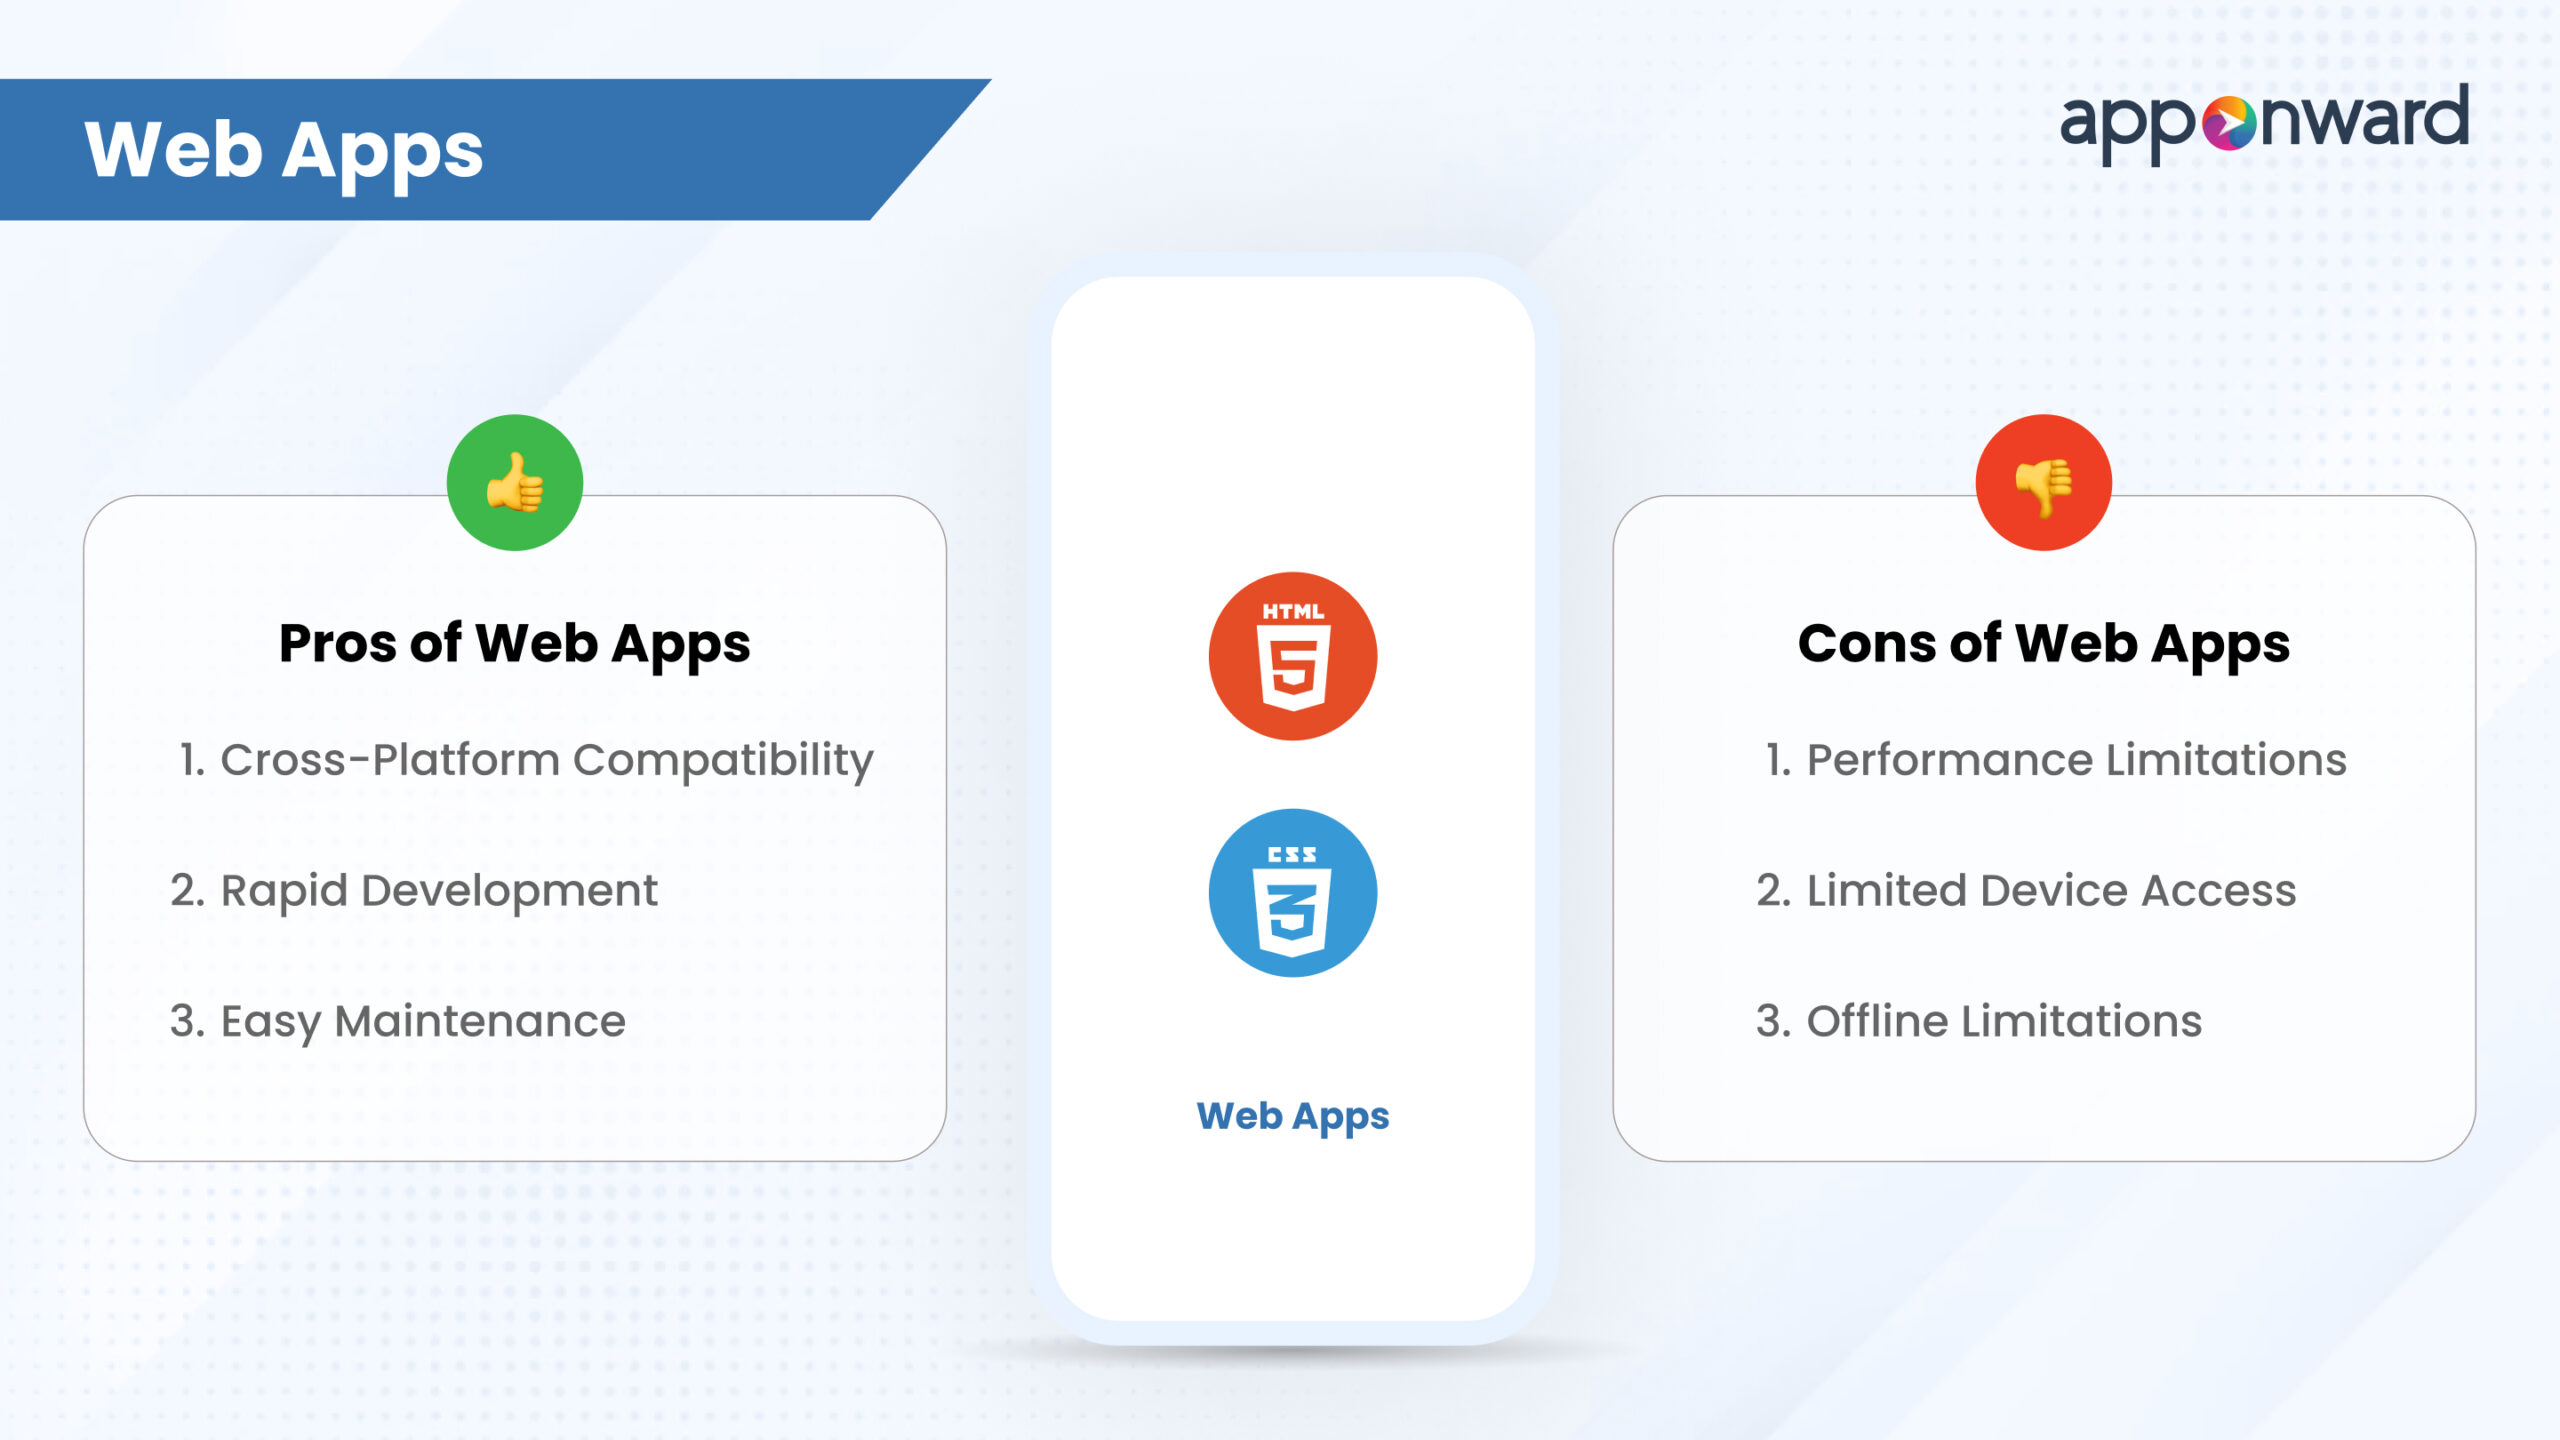 Web Apps scaled